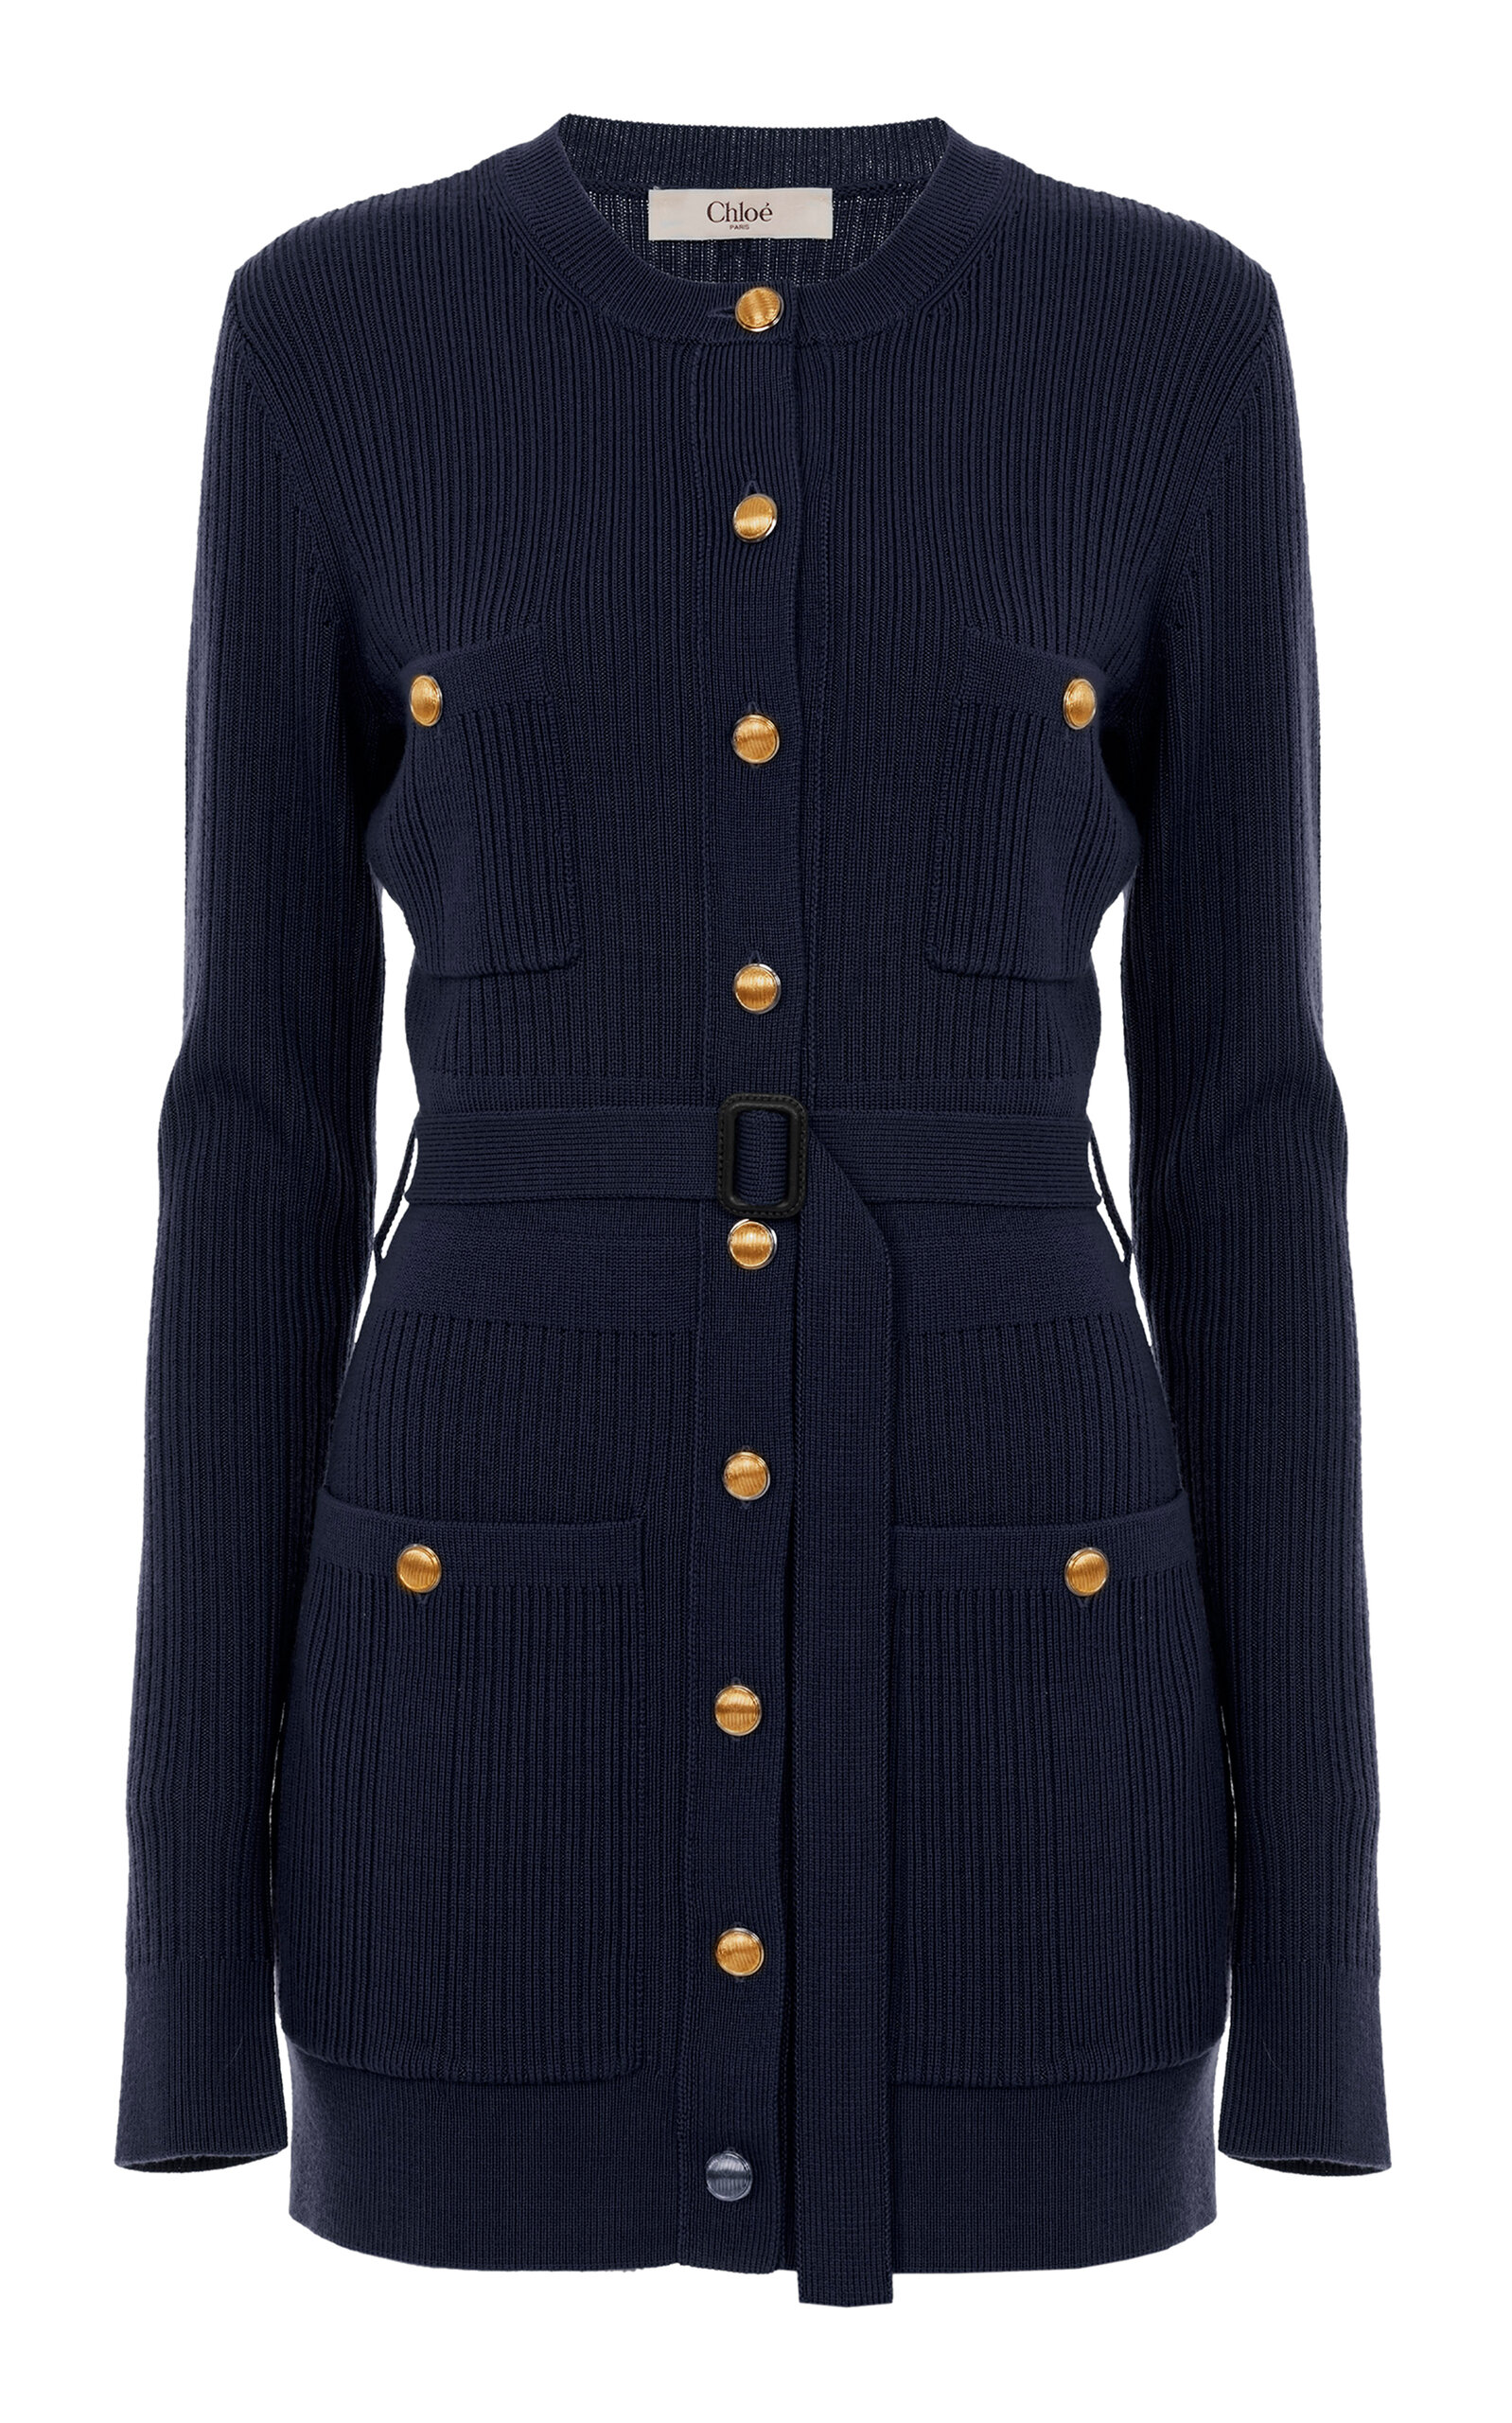 CHLOÉ BELTED WOOL KNIT CARDIGAN